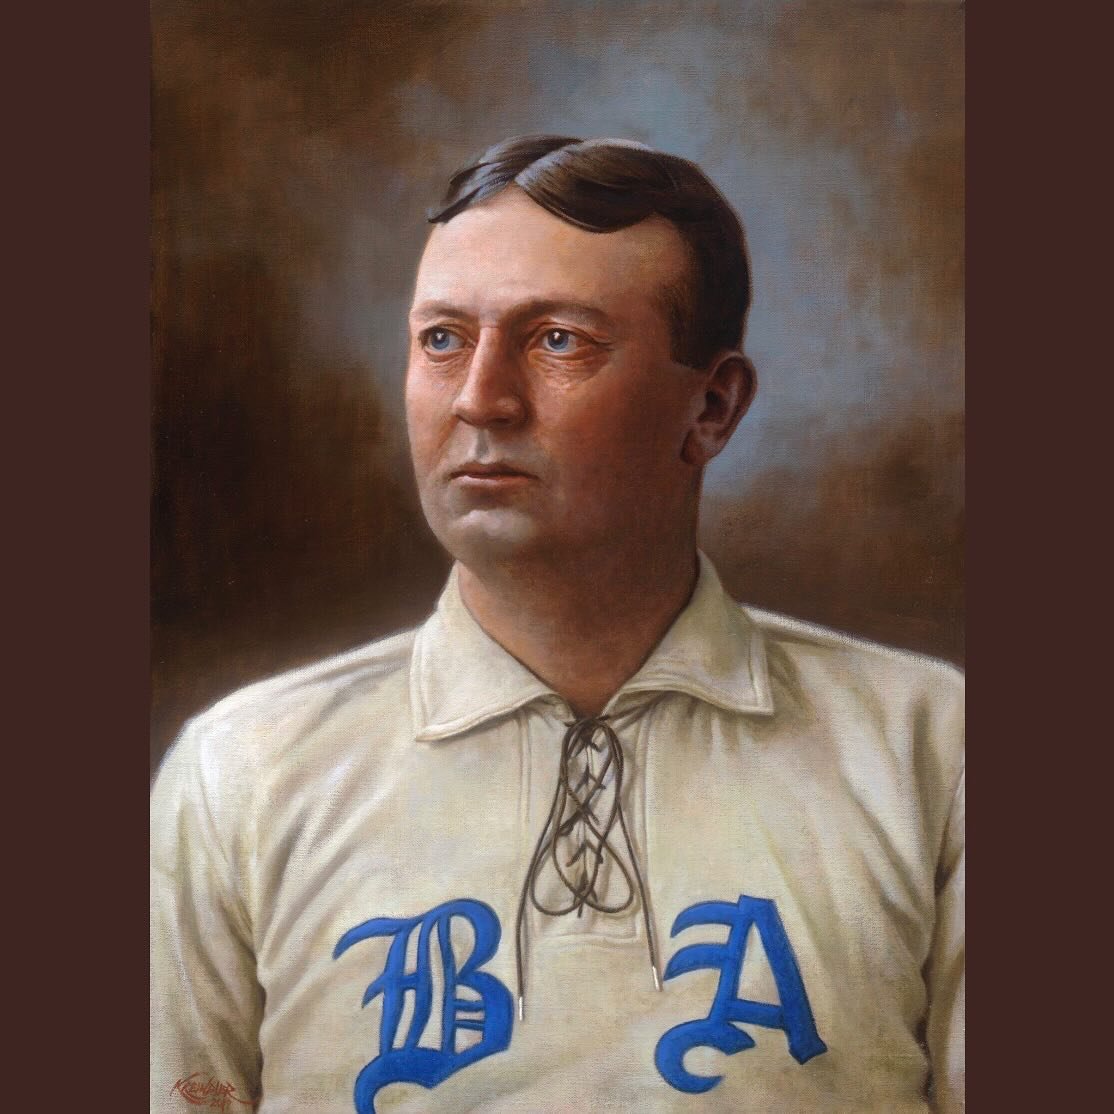 On this day in 1904, Cy Young threw the first perfect game in American League history, defeating Rube Waddell and the Philadelphia Athletics, 3-0. Here&rsquo;s my painting of him with the Boston Americans in 1902, based on the photography of Carl Hor